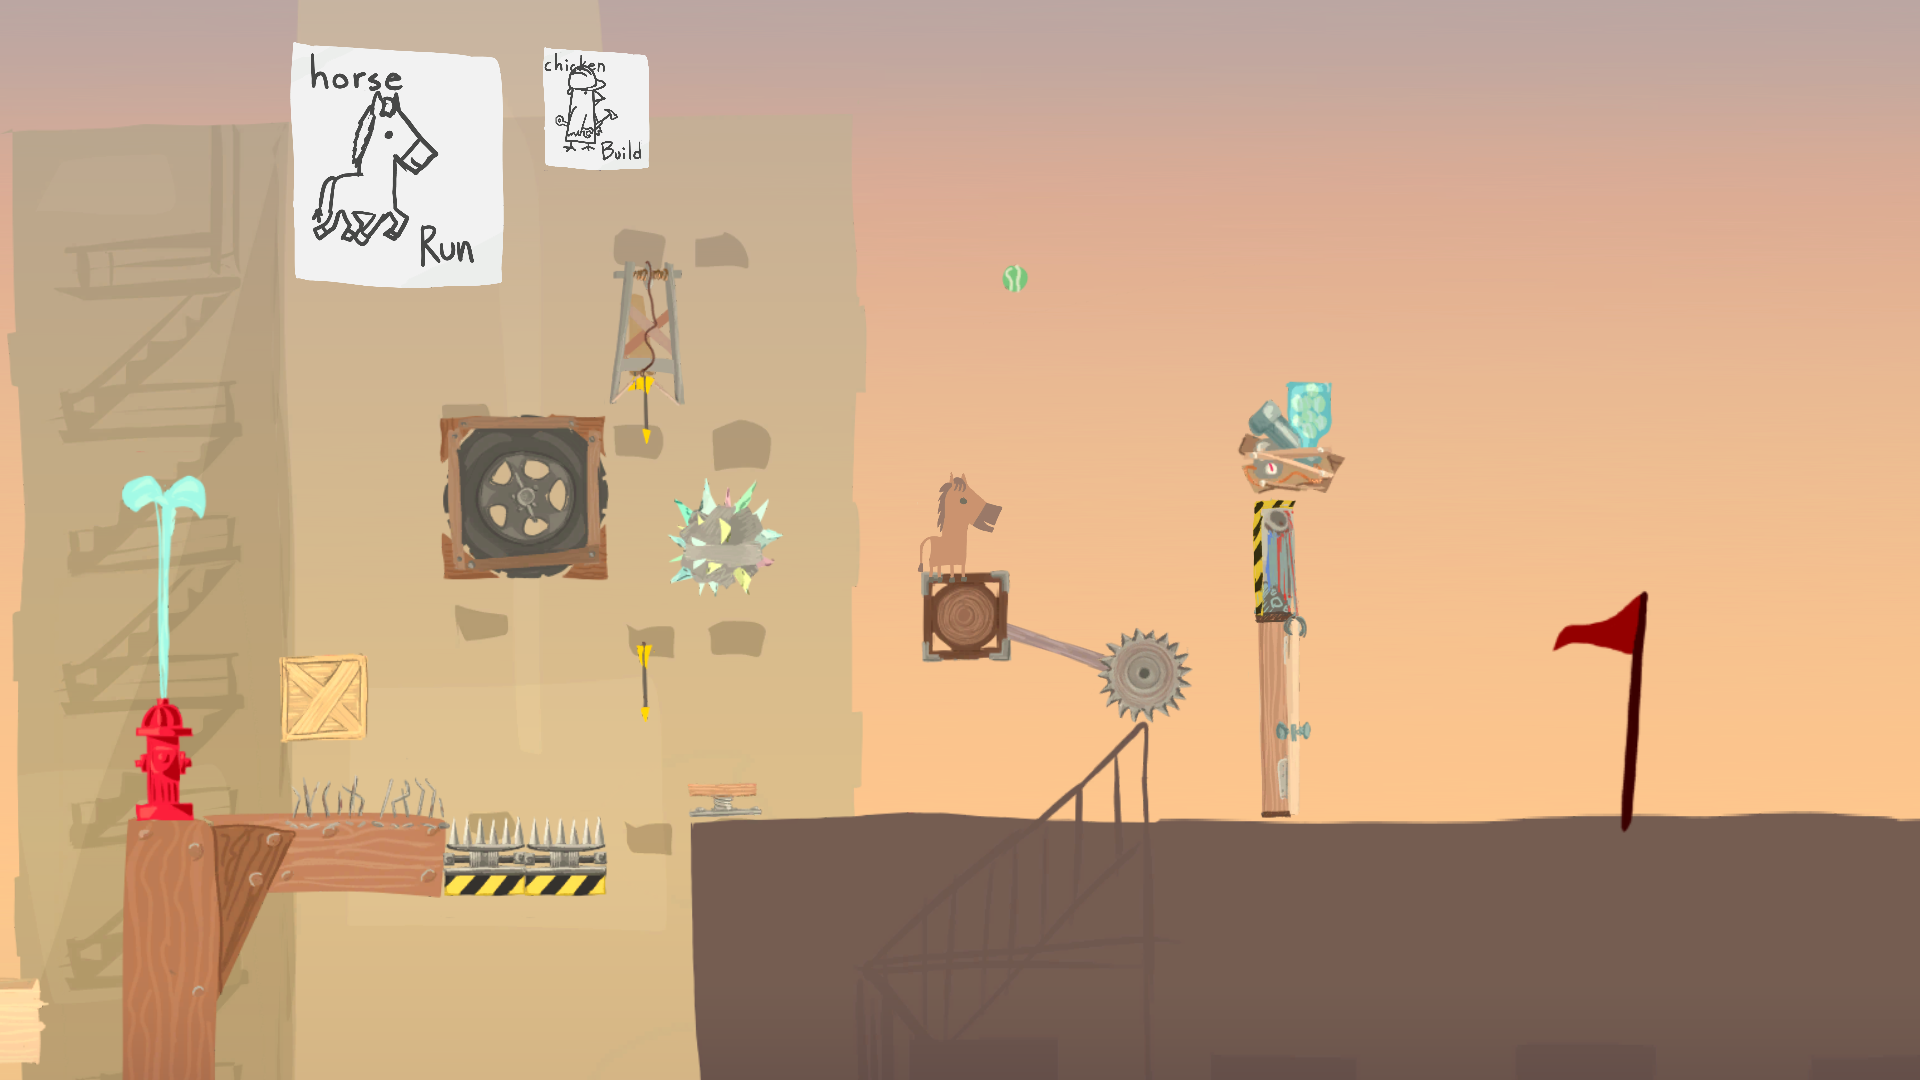 ultimate chicken horse initial release date